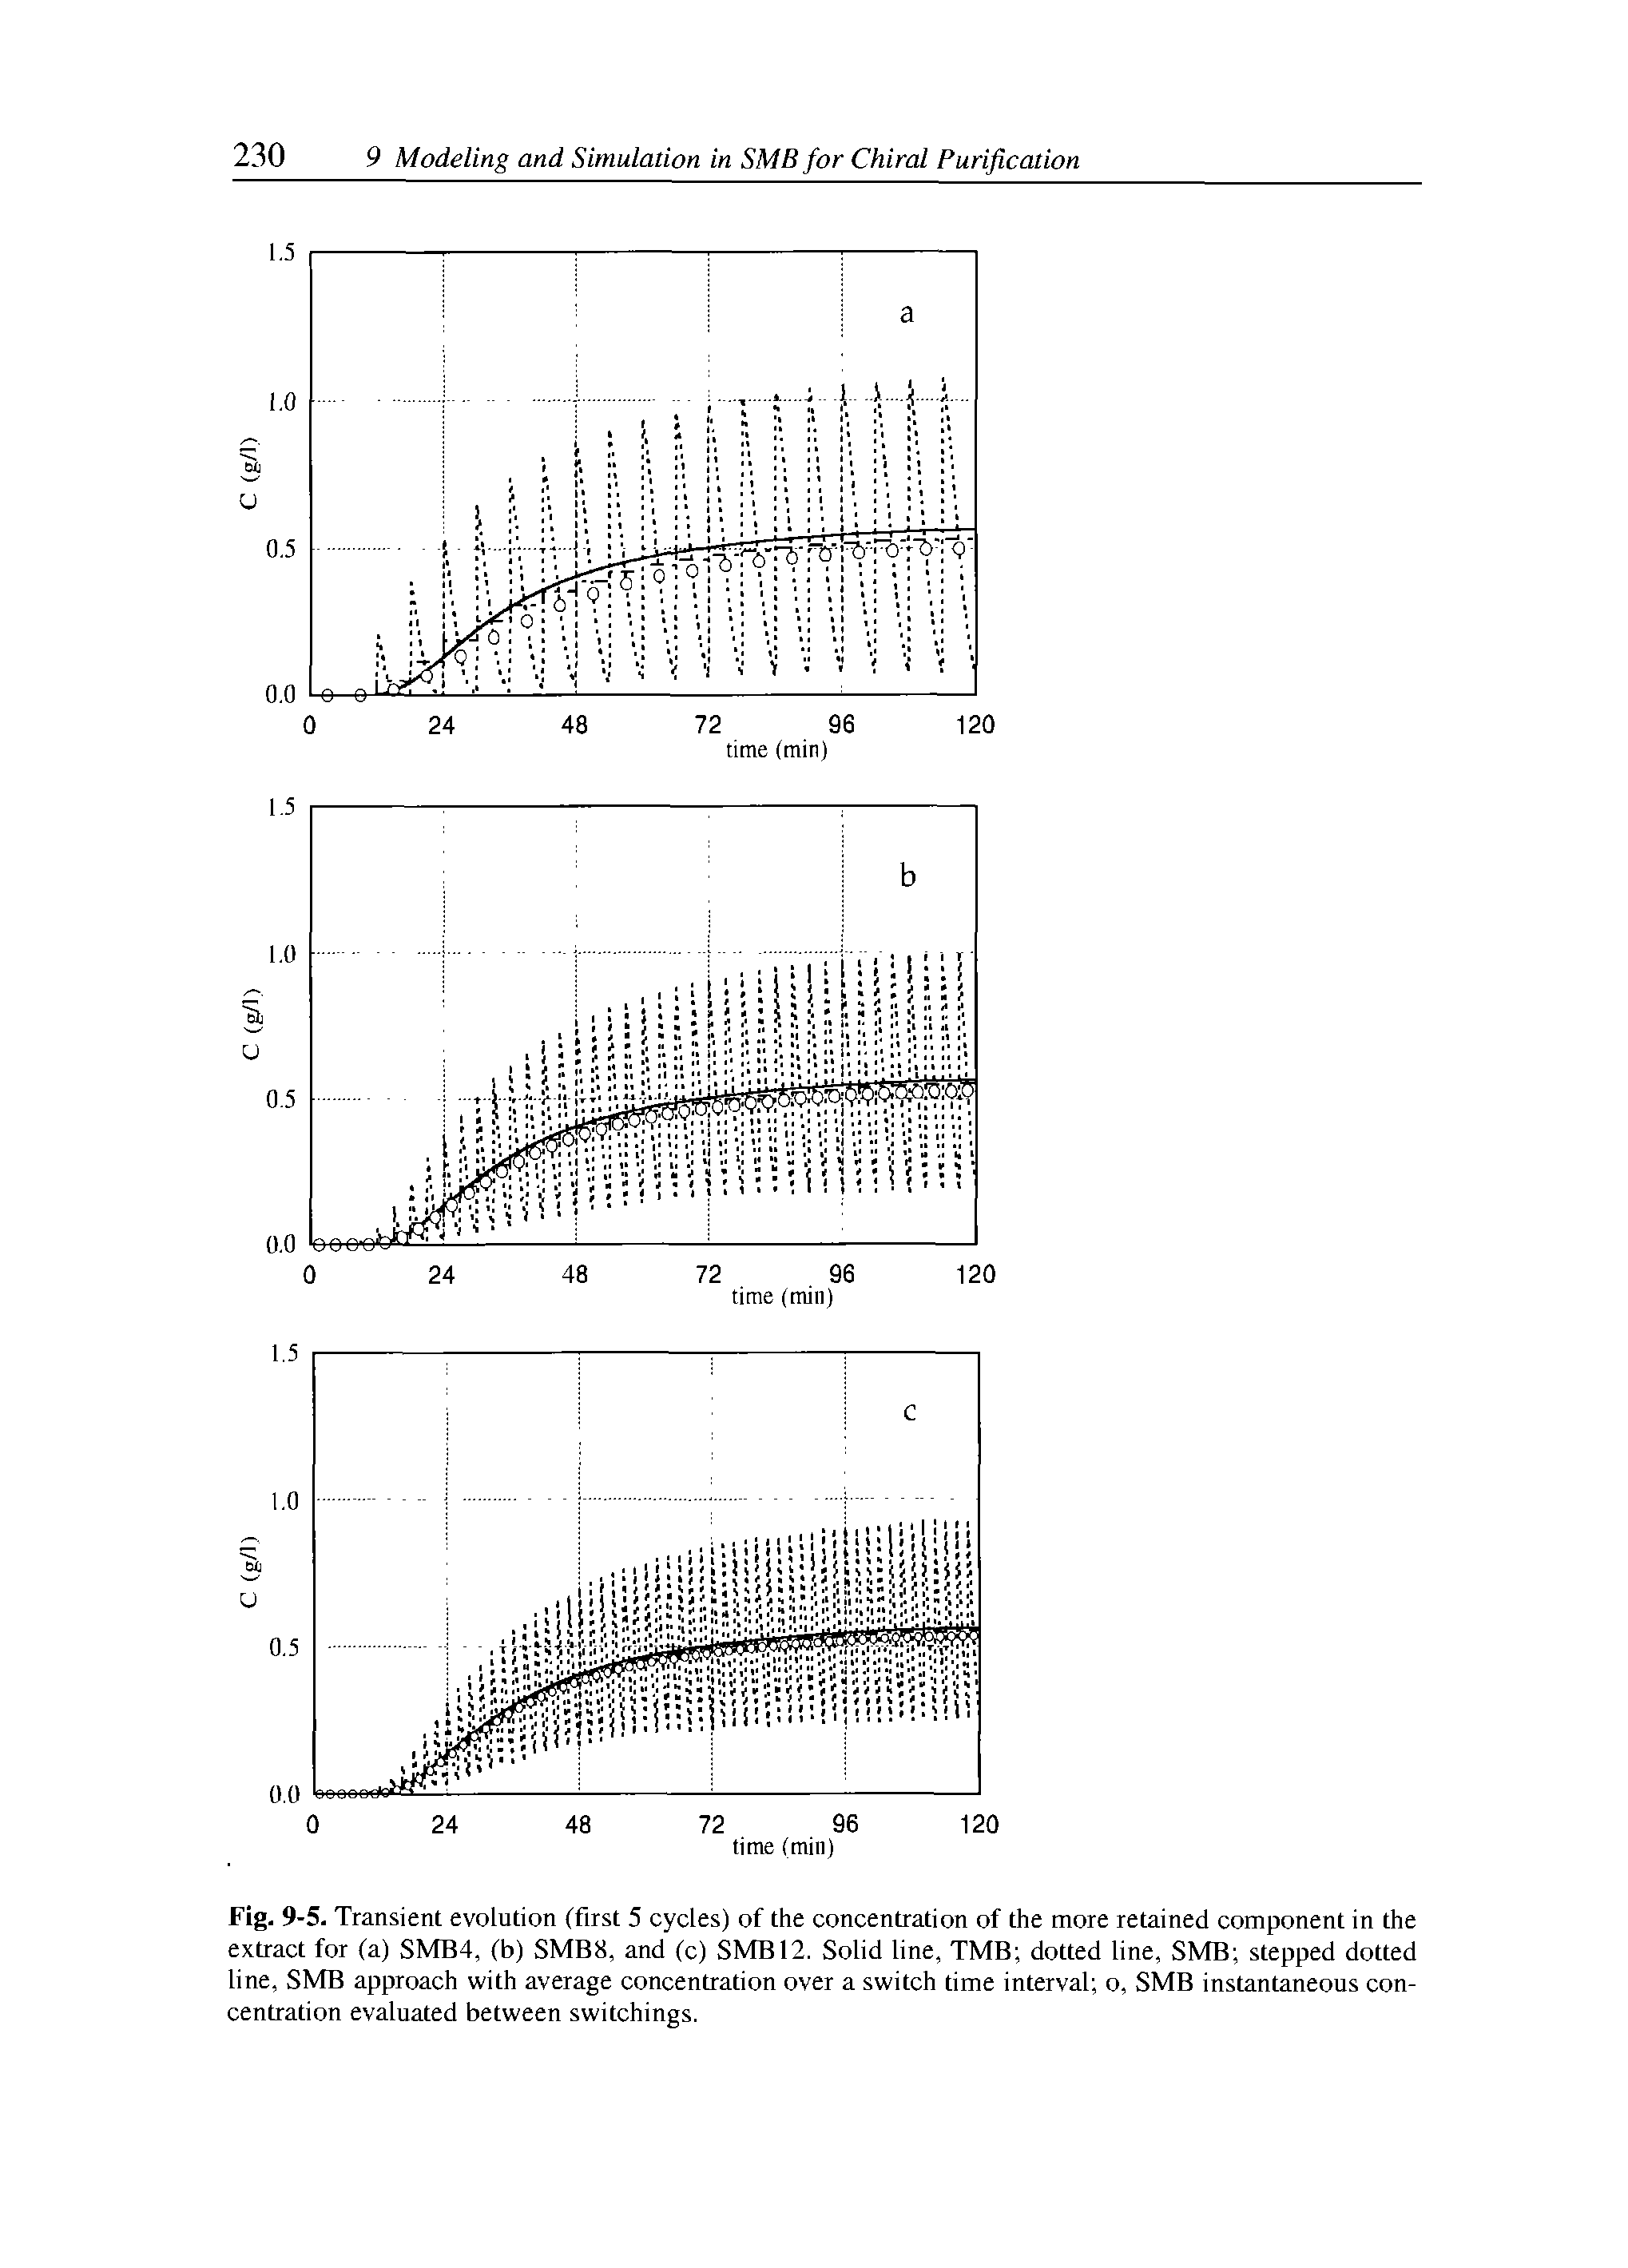 Fig. 9-5. Transient evolution (first 5 cycles) of the concentration of the more retained component in the extract for (a) SMB4, (b) SMBS, and (c) SMB 12. Solid line, TMB dotted line, SMB stepped dotted line, SMB approach with average concentration over a switch time interval o, SMB instantaneous concentration evaluated between switchings.